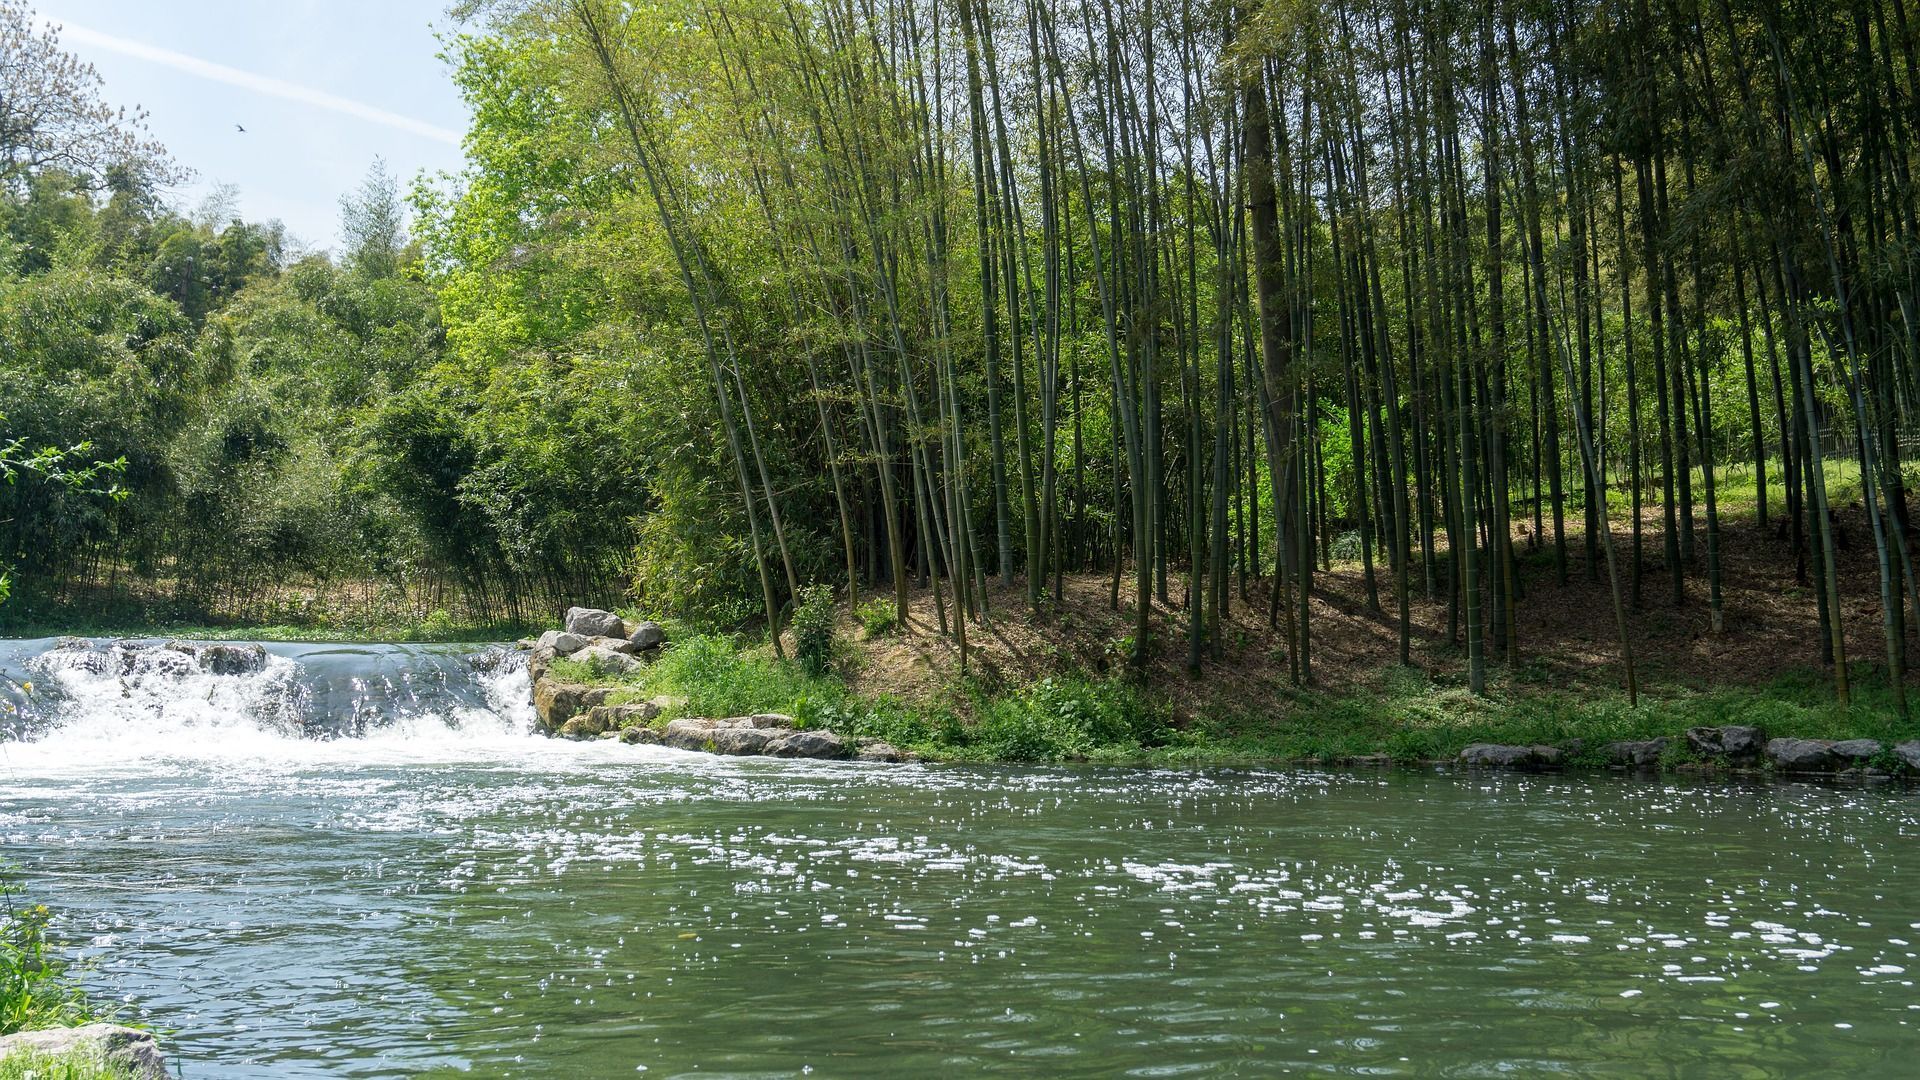 Bamboo River Side Wallpaper - Bamboo Tree In River Side - HD Wallpaper 